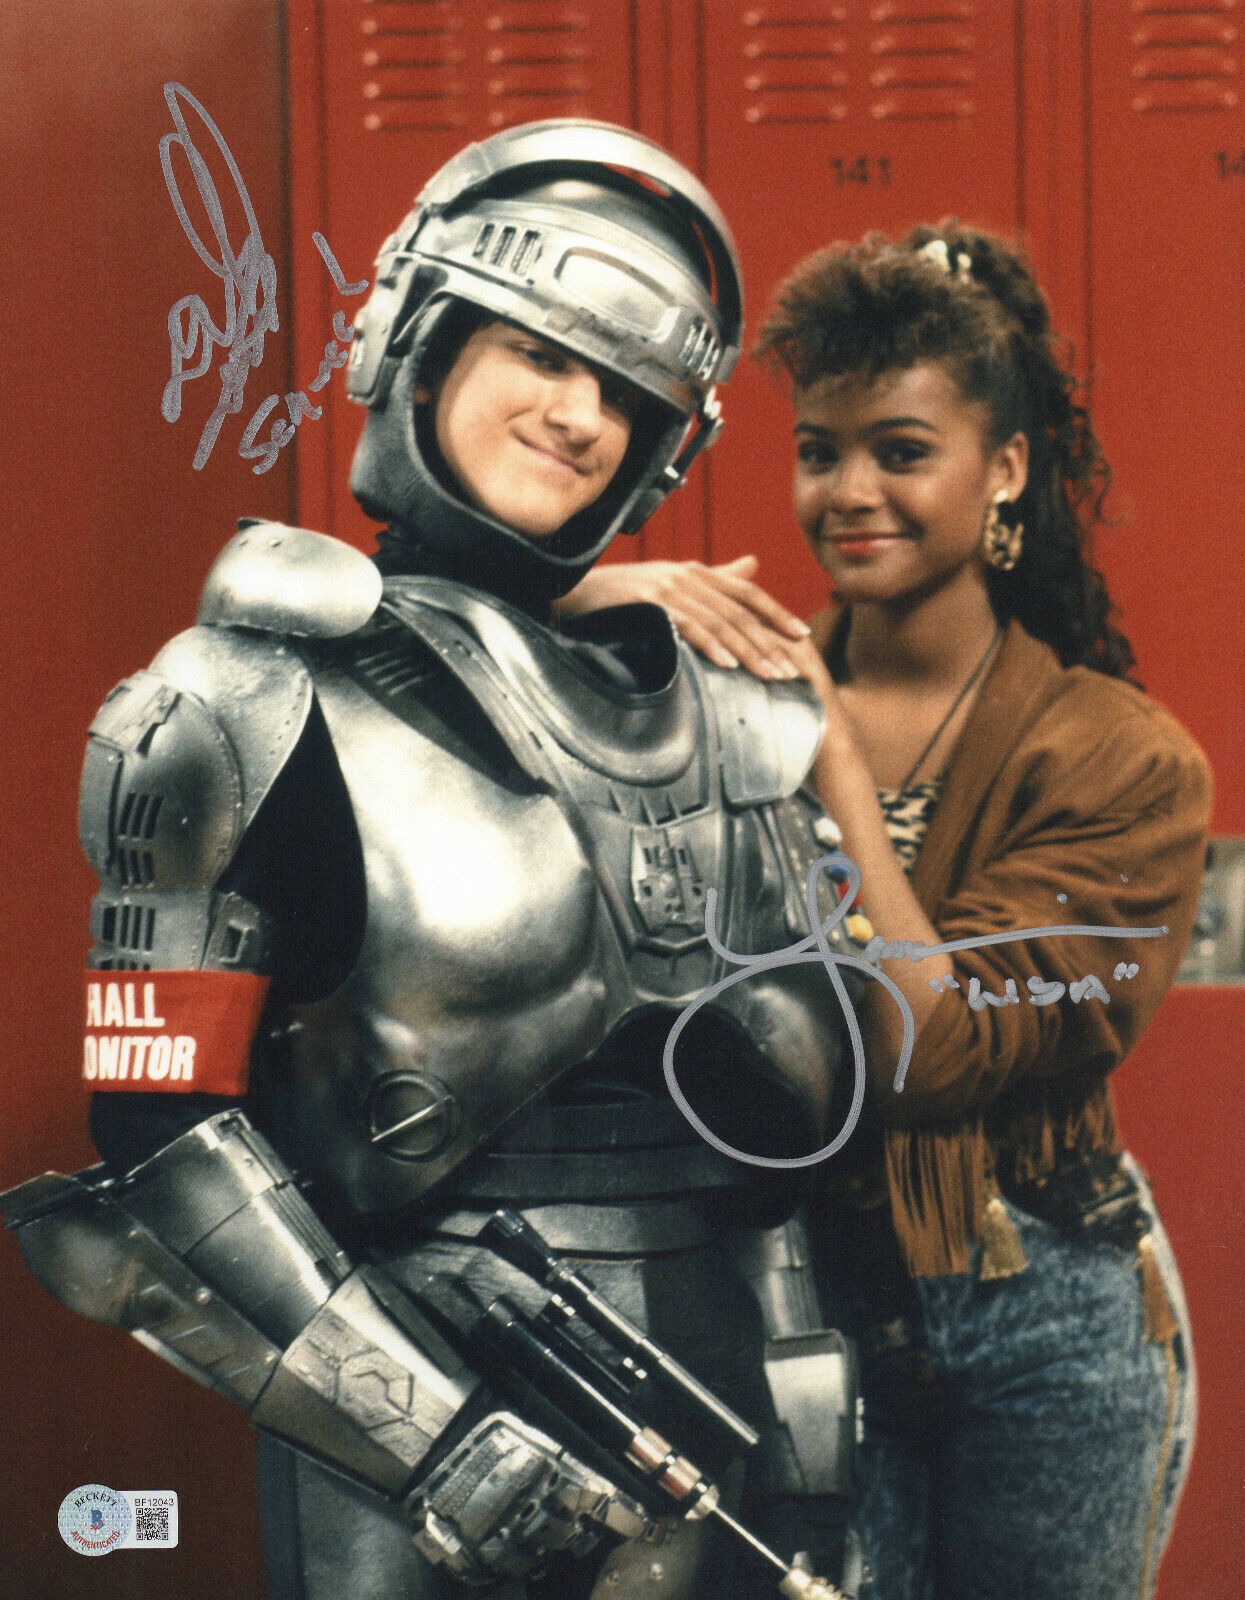 DUSTIN DIAMOND LARK VOORHIES SIGNED 11X14 SAVED BY THE BELL PHOTO AUTO BECKETT 